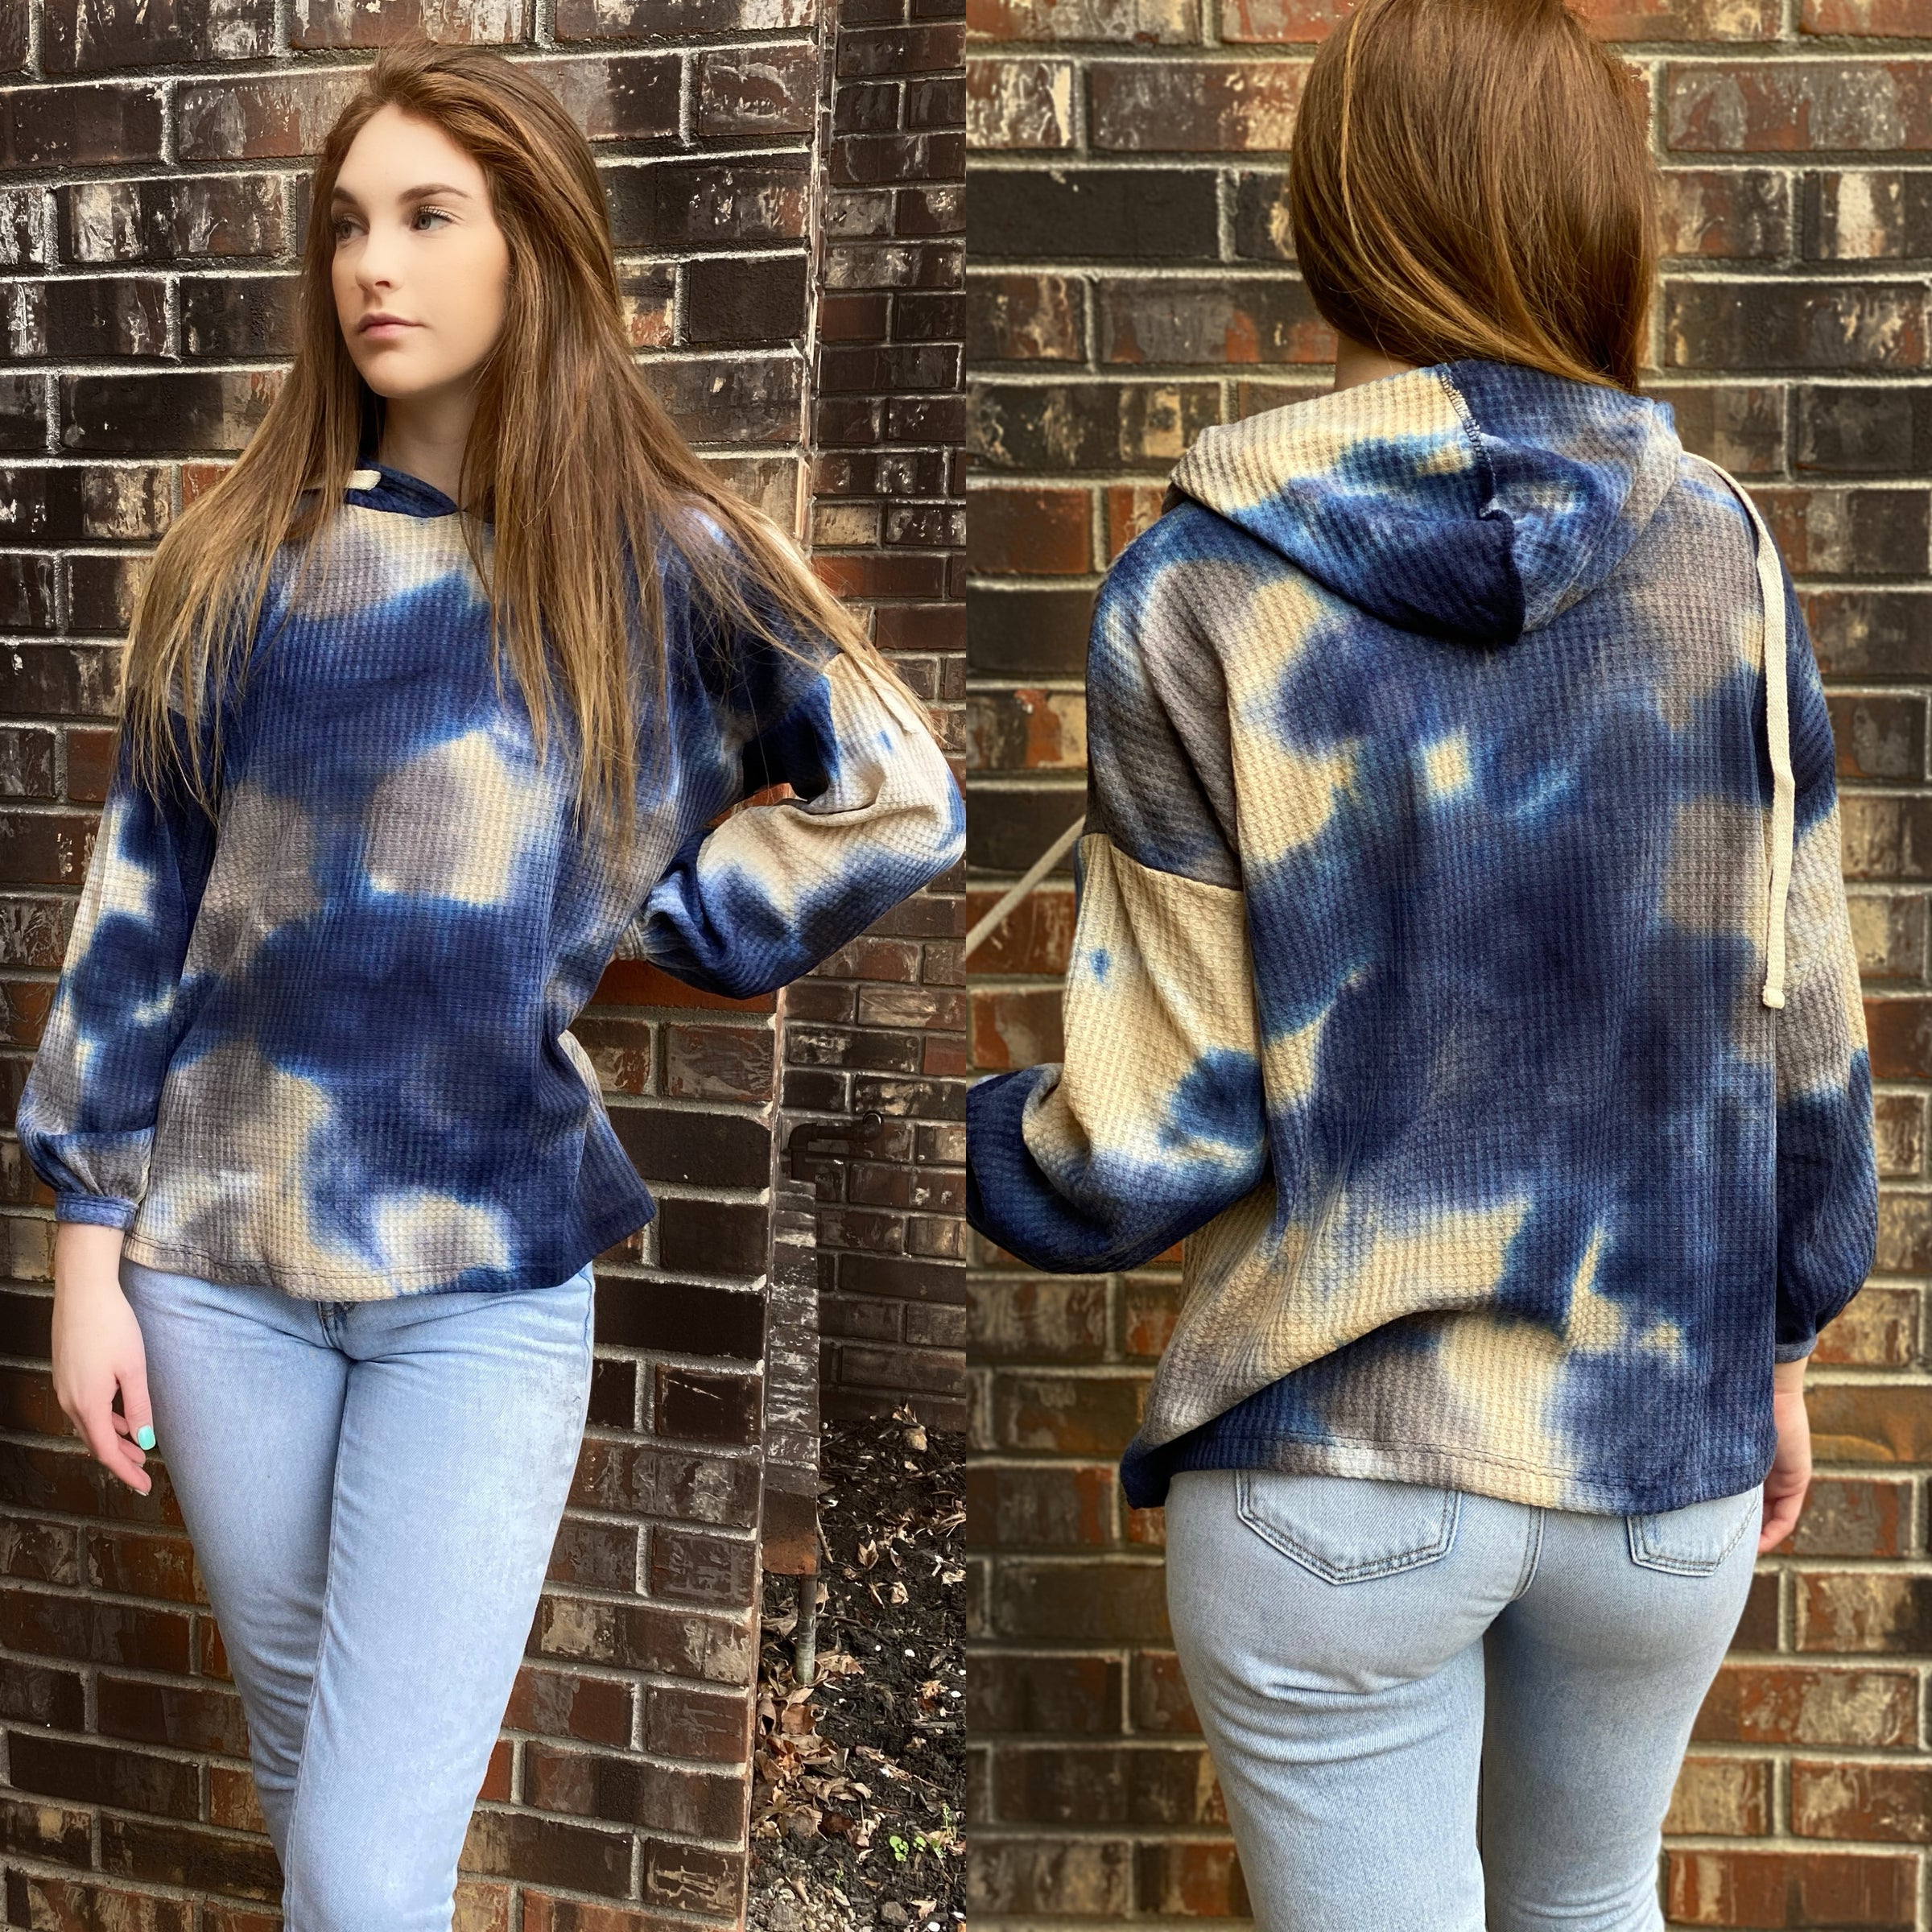 Girl Wearing Tie-Dye Bubble Sleeve Hoodie Fabric Is Ultra Soft Stretchy Colors Cobalt Blue ,White ,Cream, Grey USA MADE  Fits True To Size